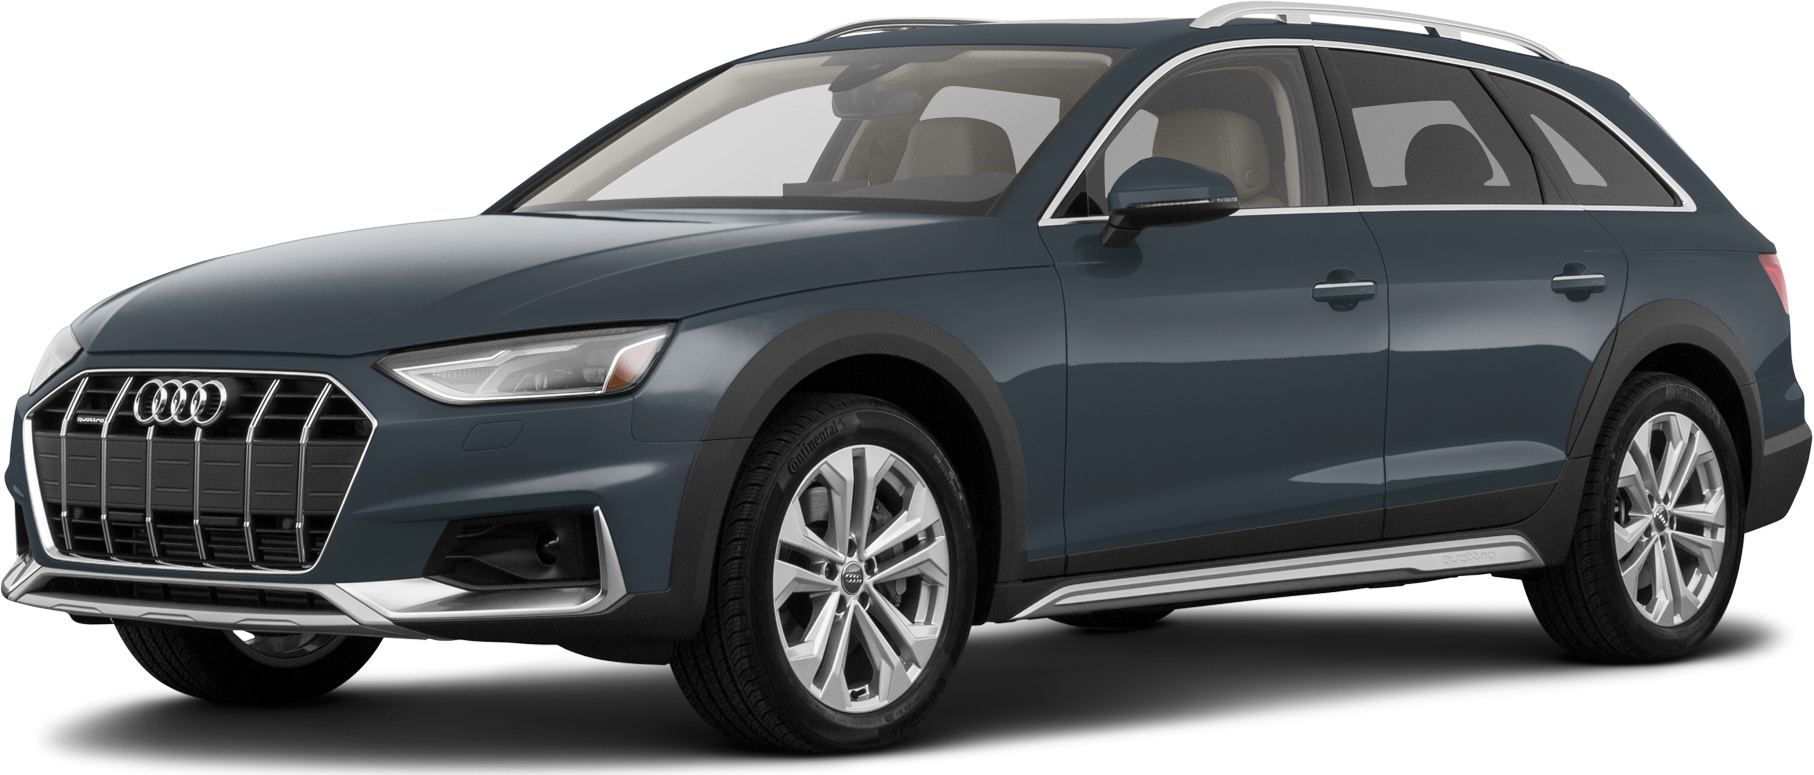 2021 Audi A4 Price, Value, Ratings & Reviews